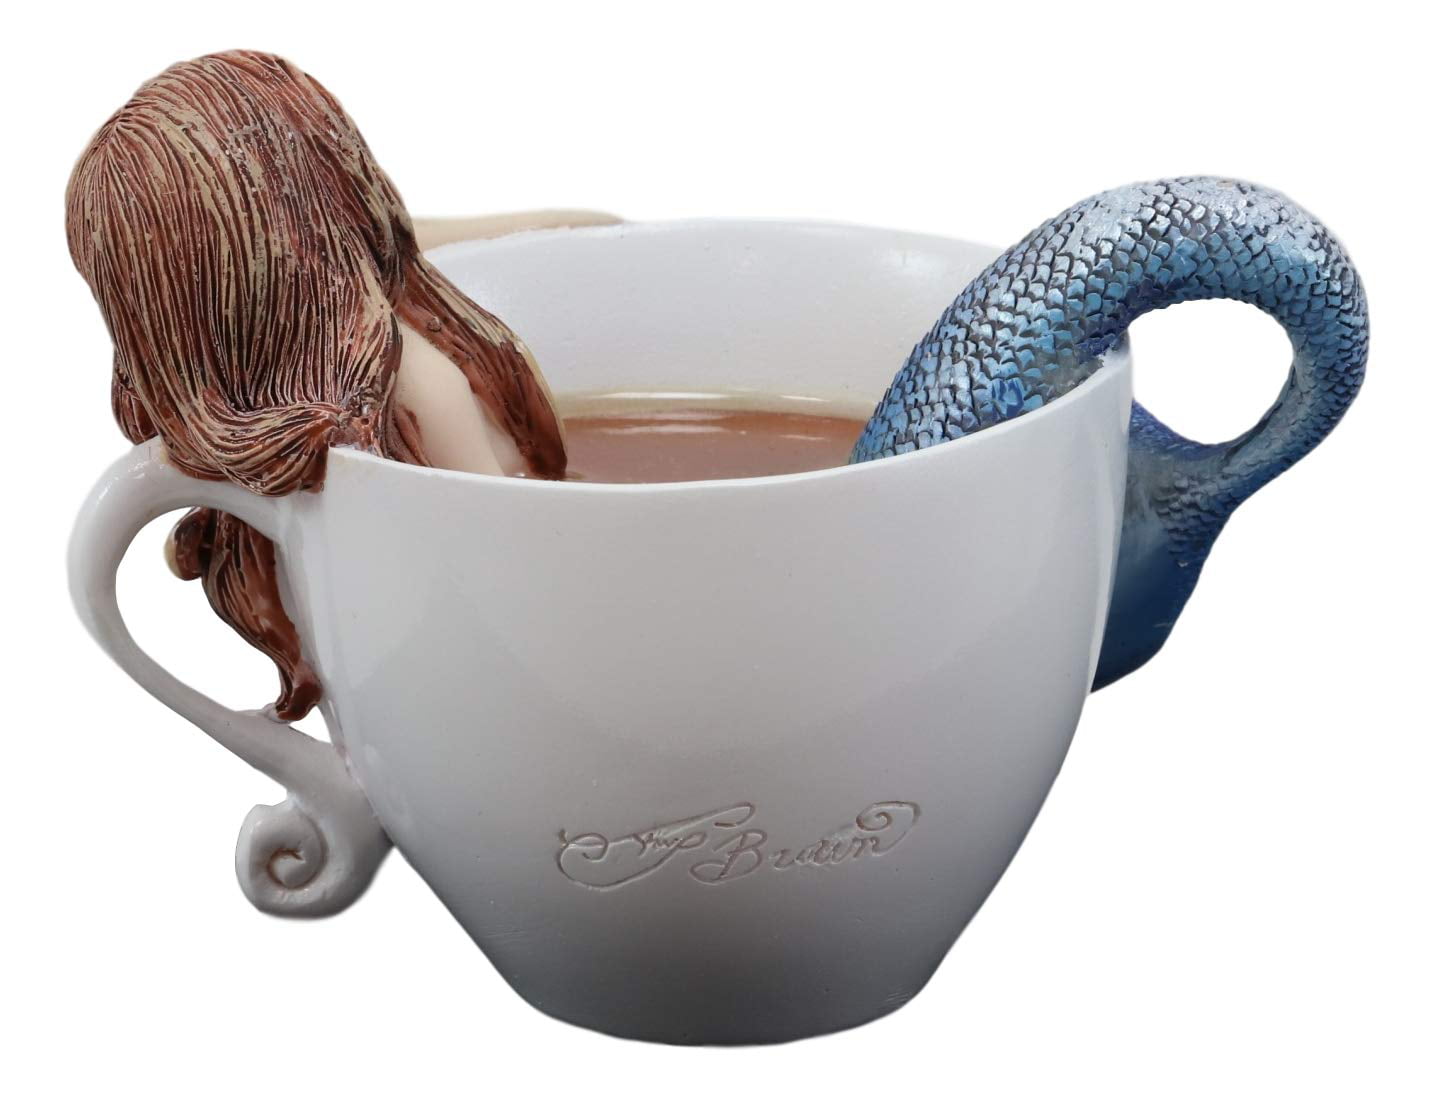 Gifts & Decor Amy Brown Sweet Addictions Relax Coffee Therapy Mermaid Sculpture Figurine